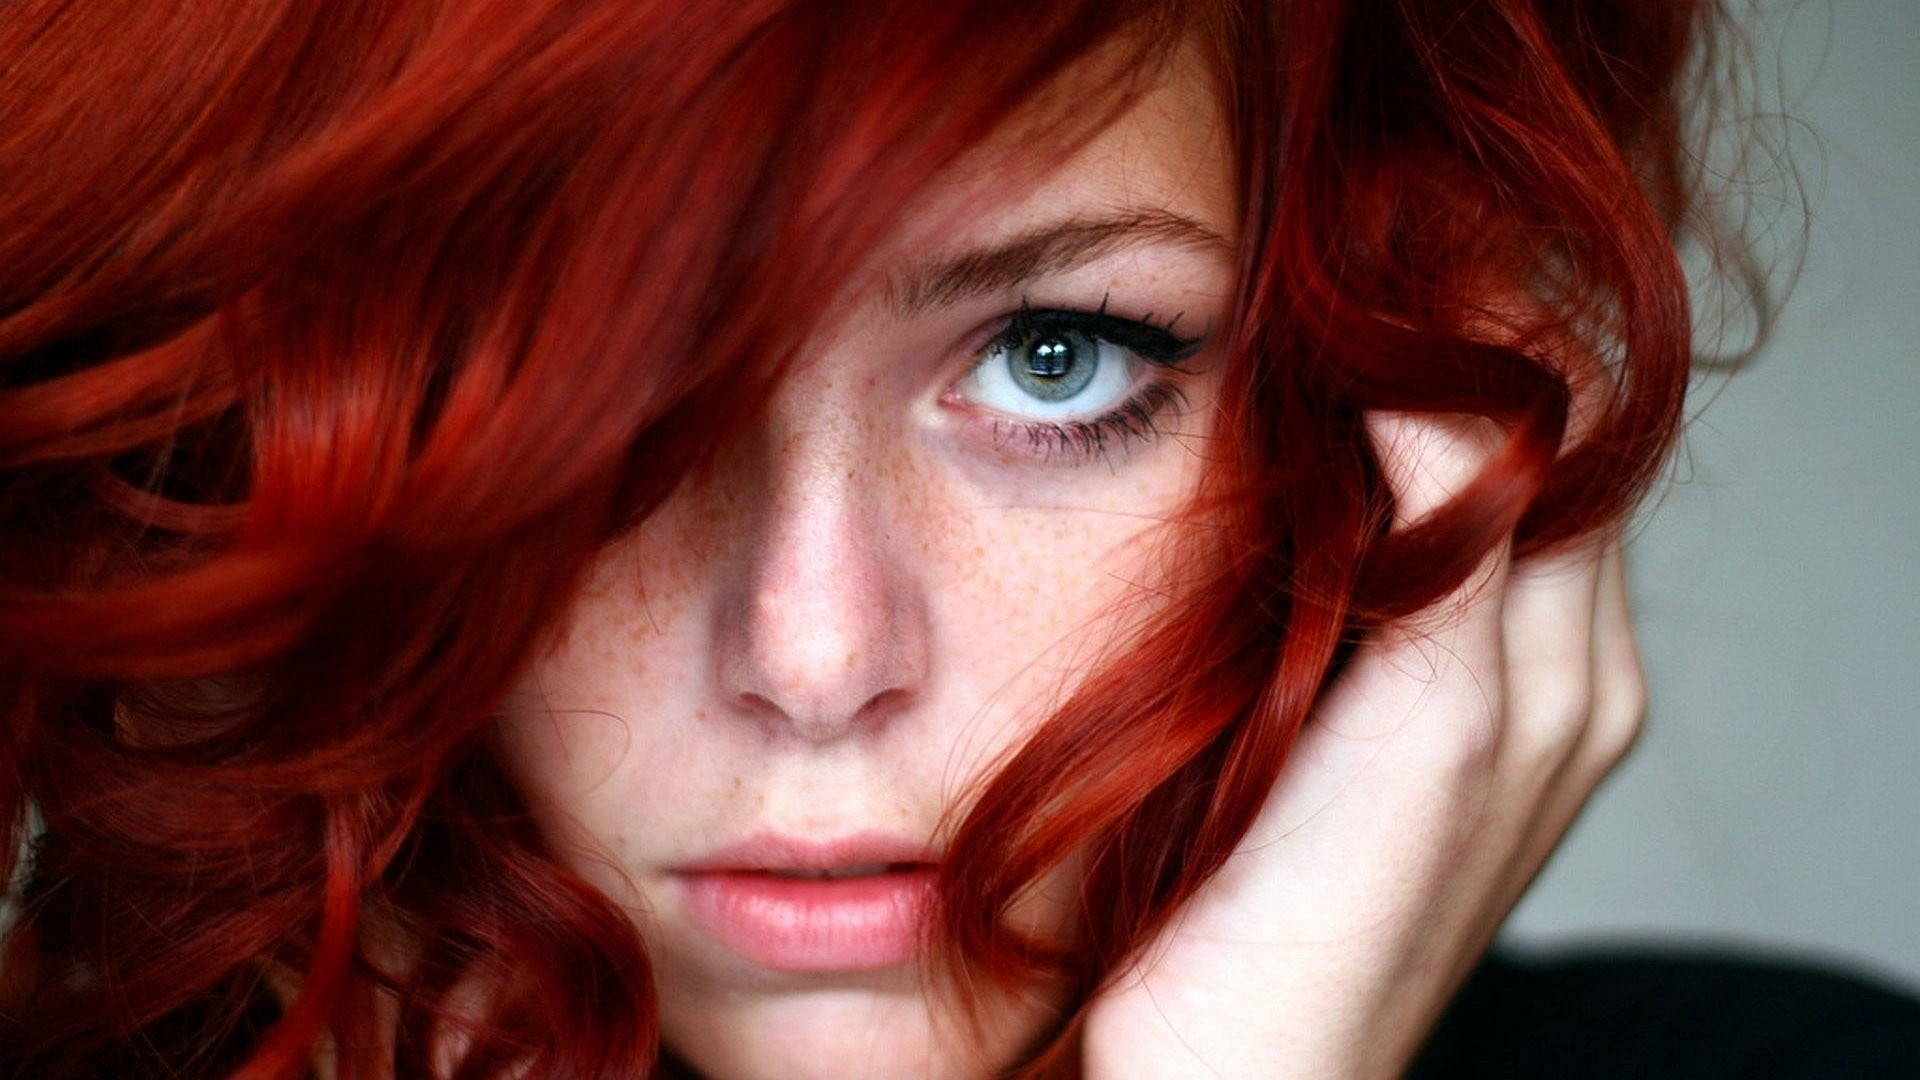 women, redhead, blue eyes, freckles, portrait, dyed red hair